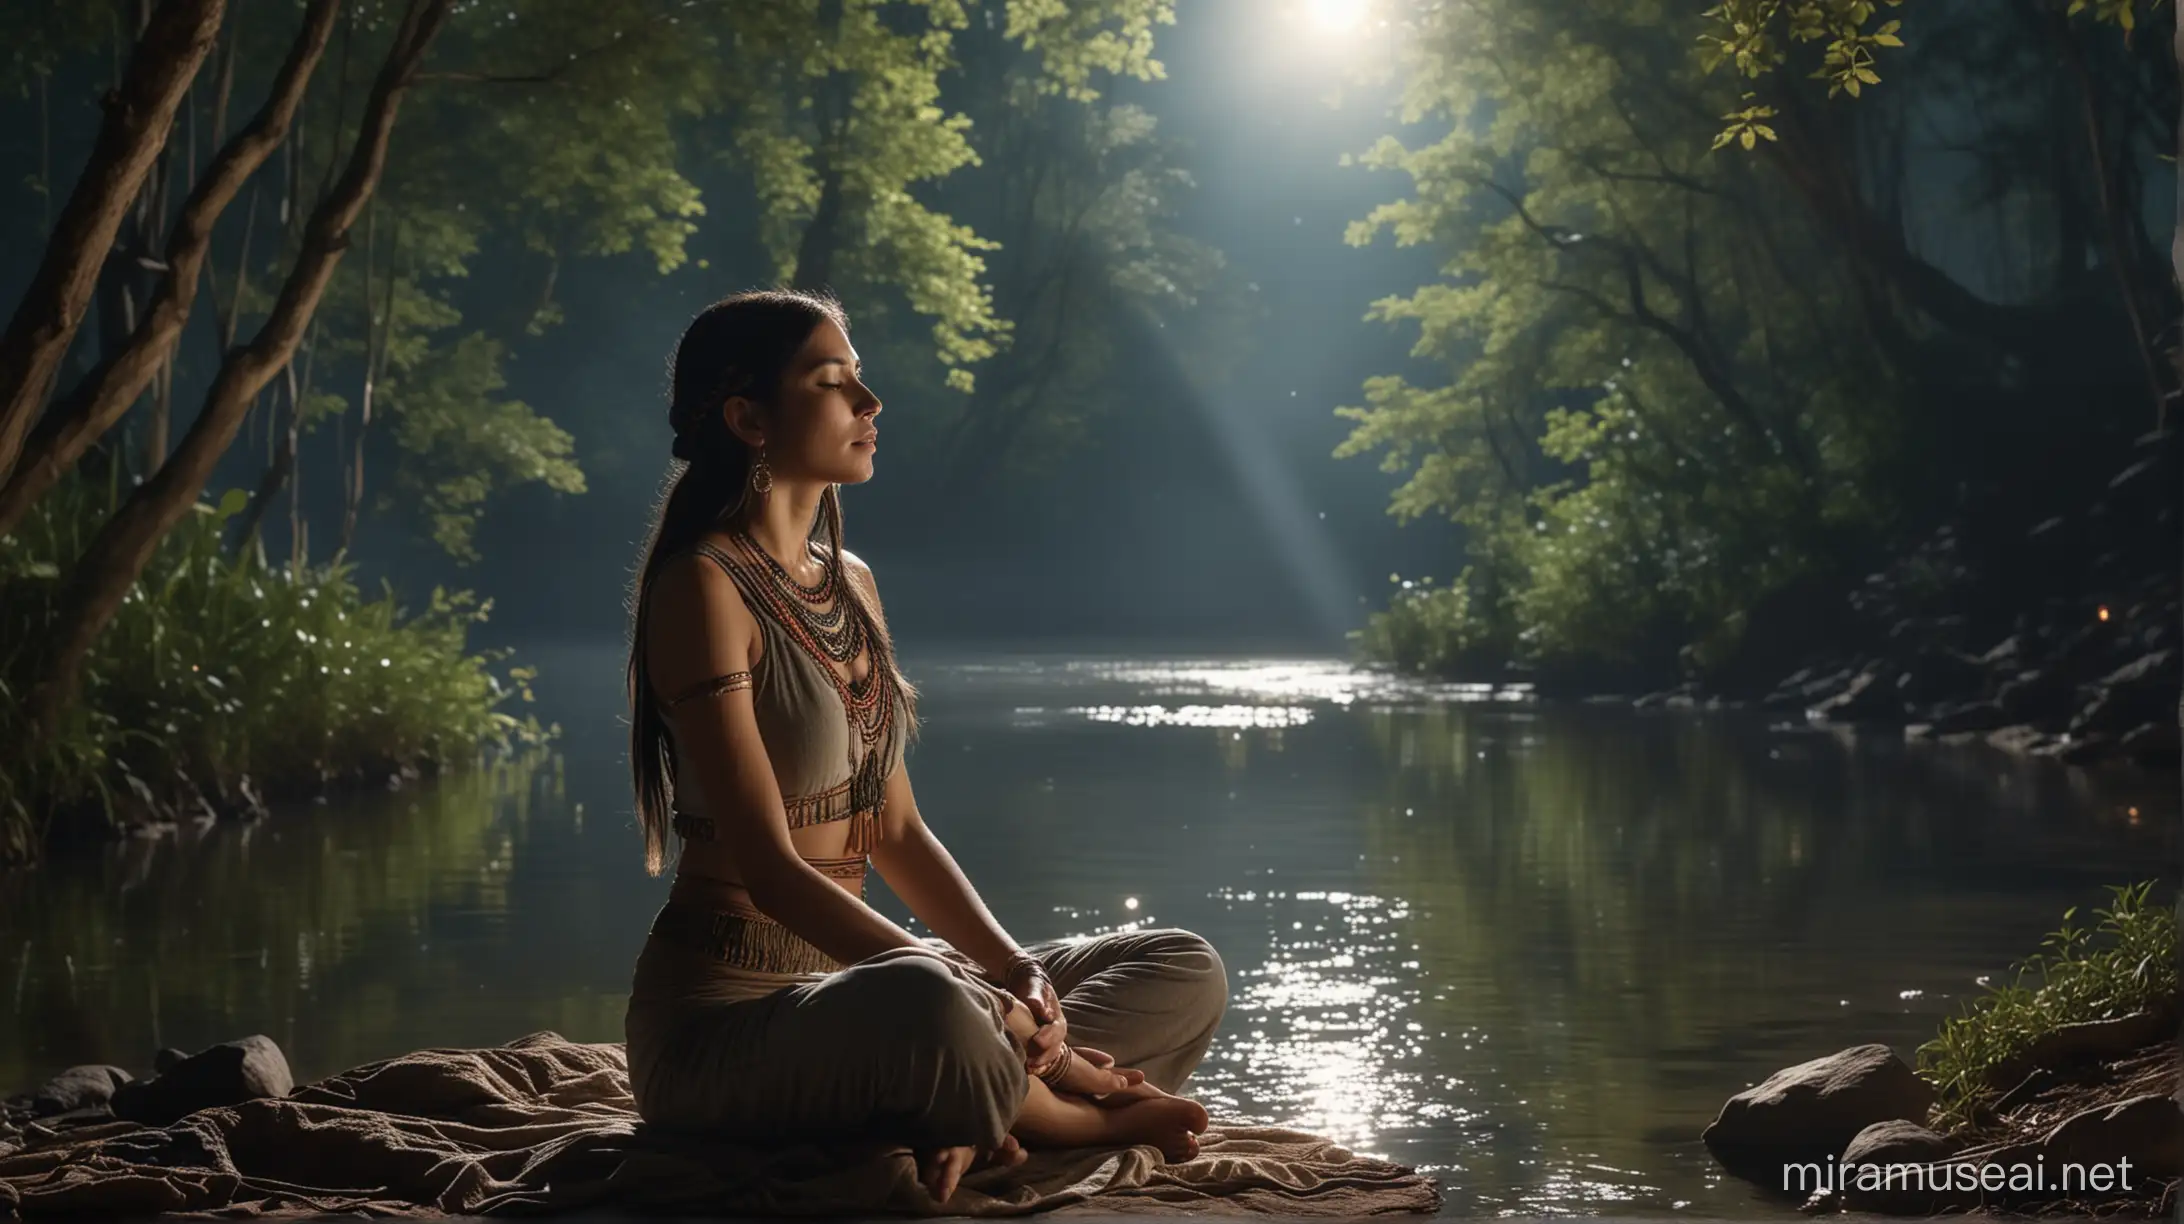 Mystical Meditation of a Young Inca Woman by Moonlit Riverbank